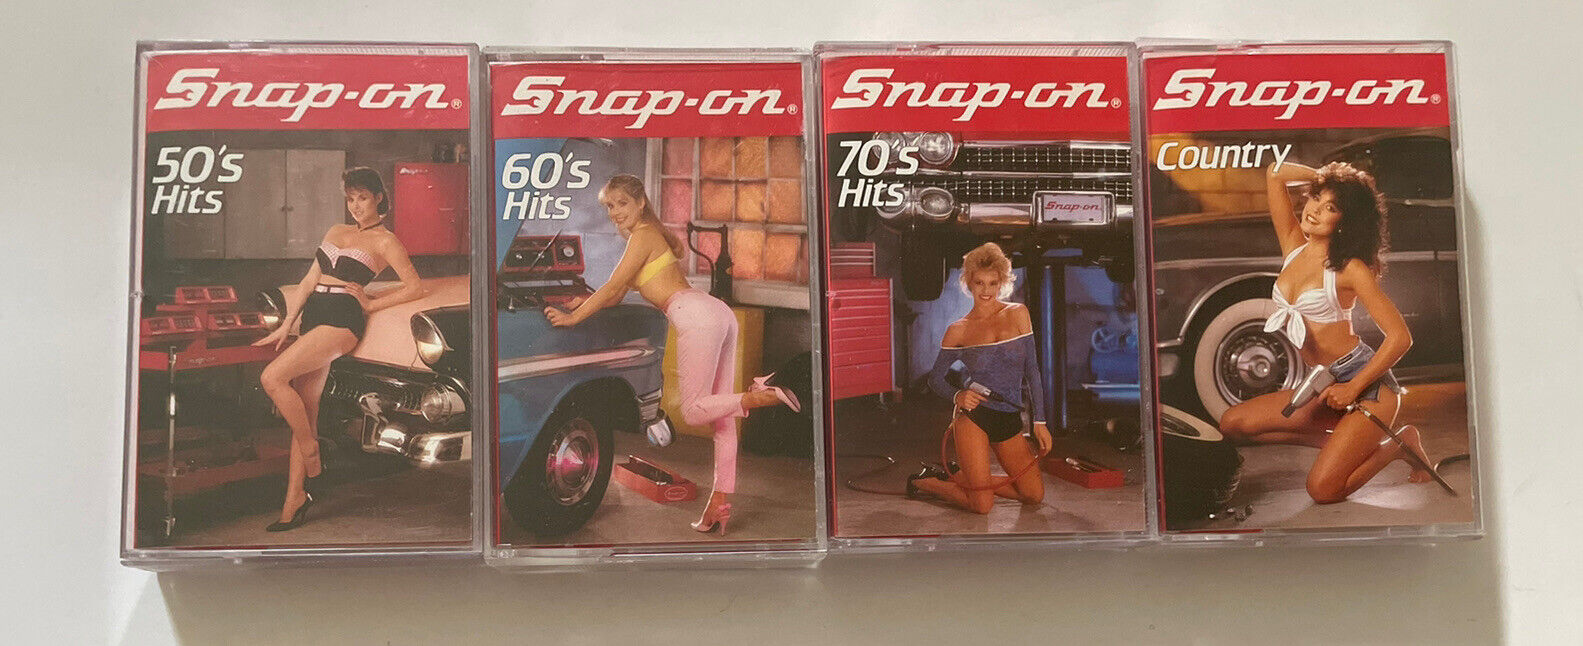 Snap-On Cassette Lot of 4 Tapes 50’s 60’s 70’s  Hits & Country VTG RARE